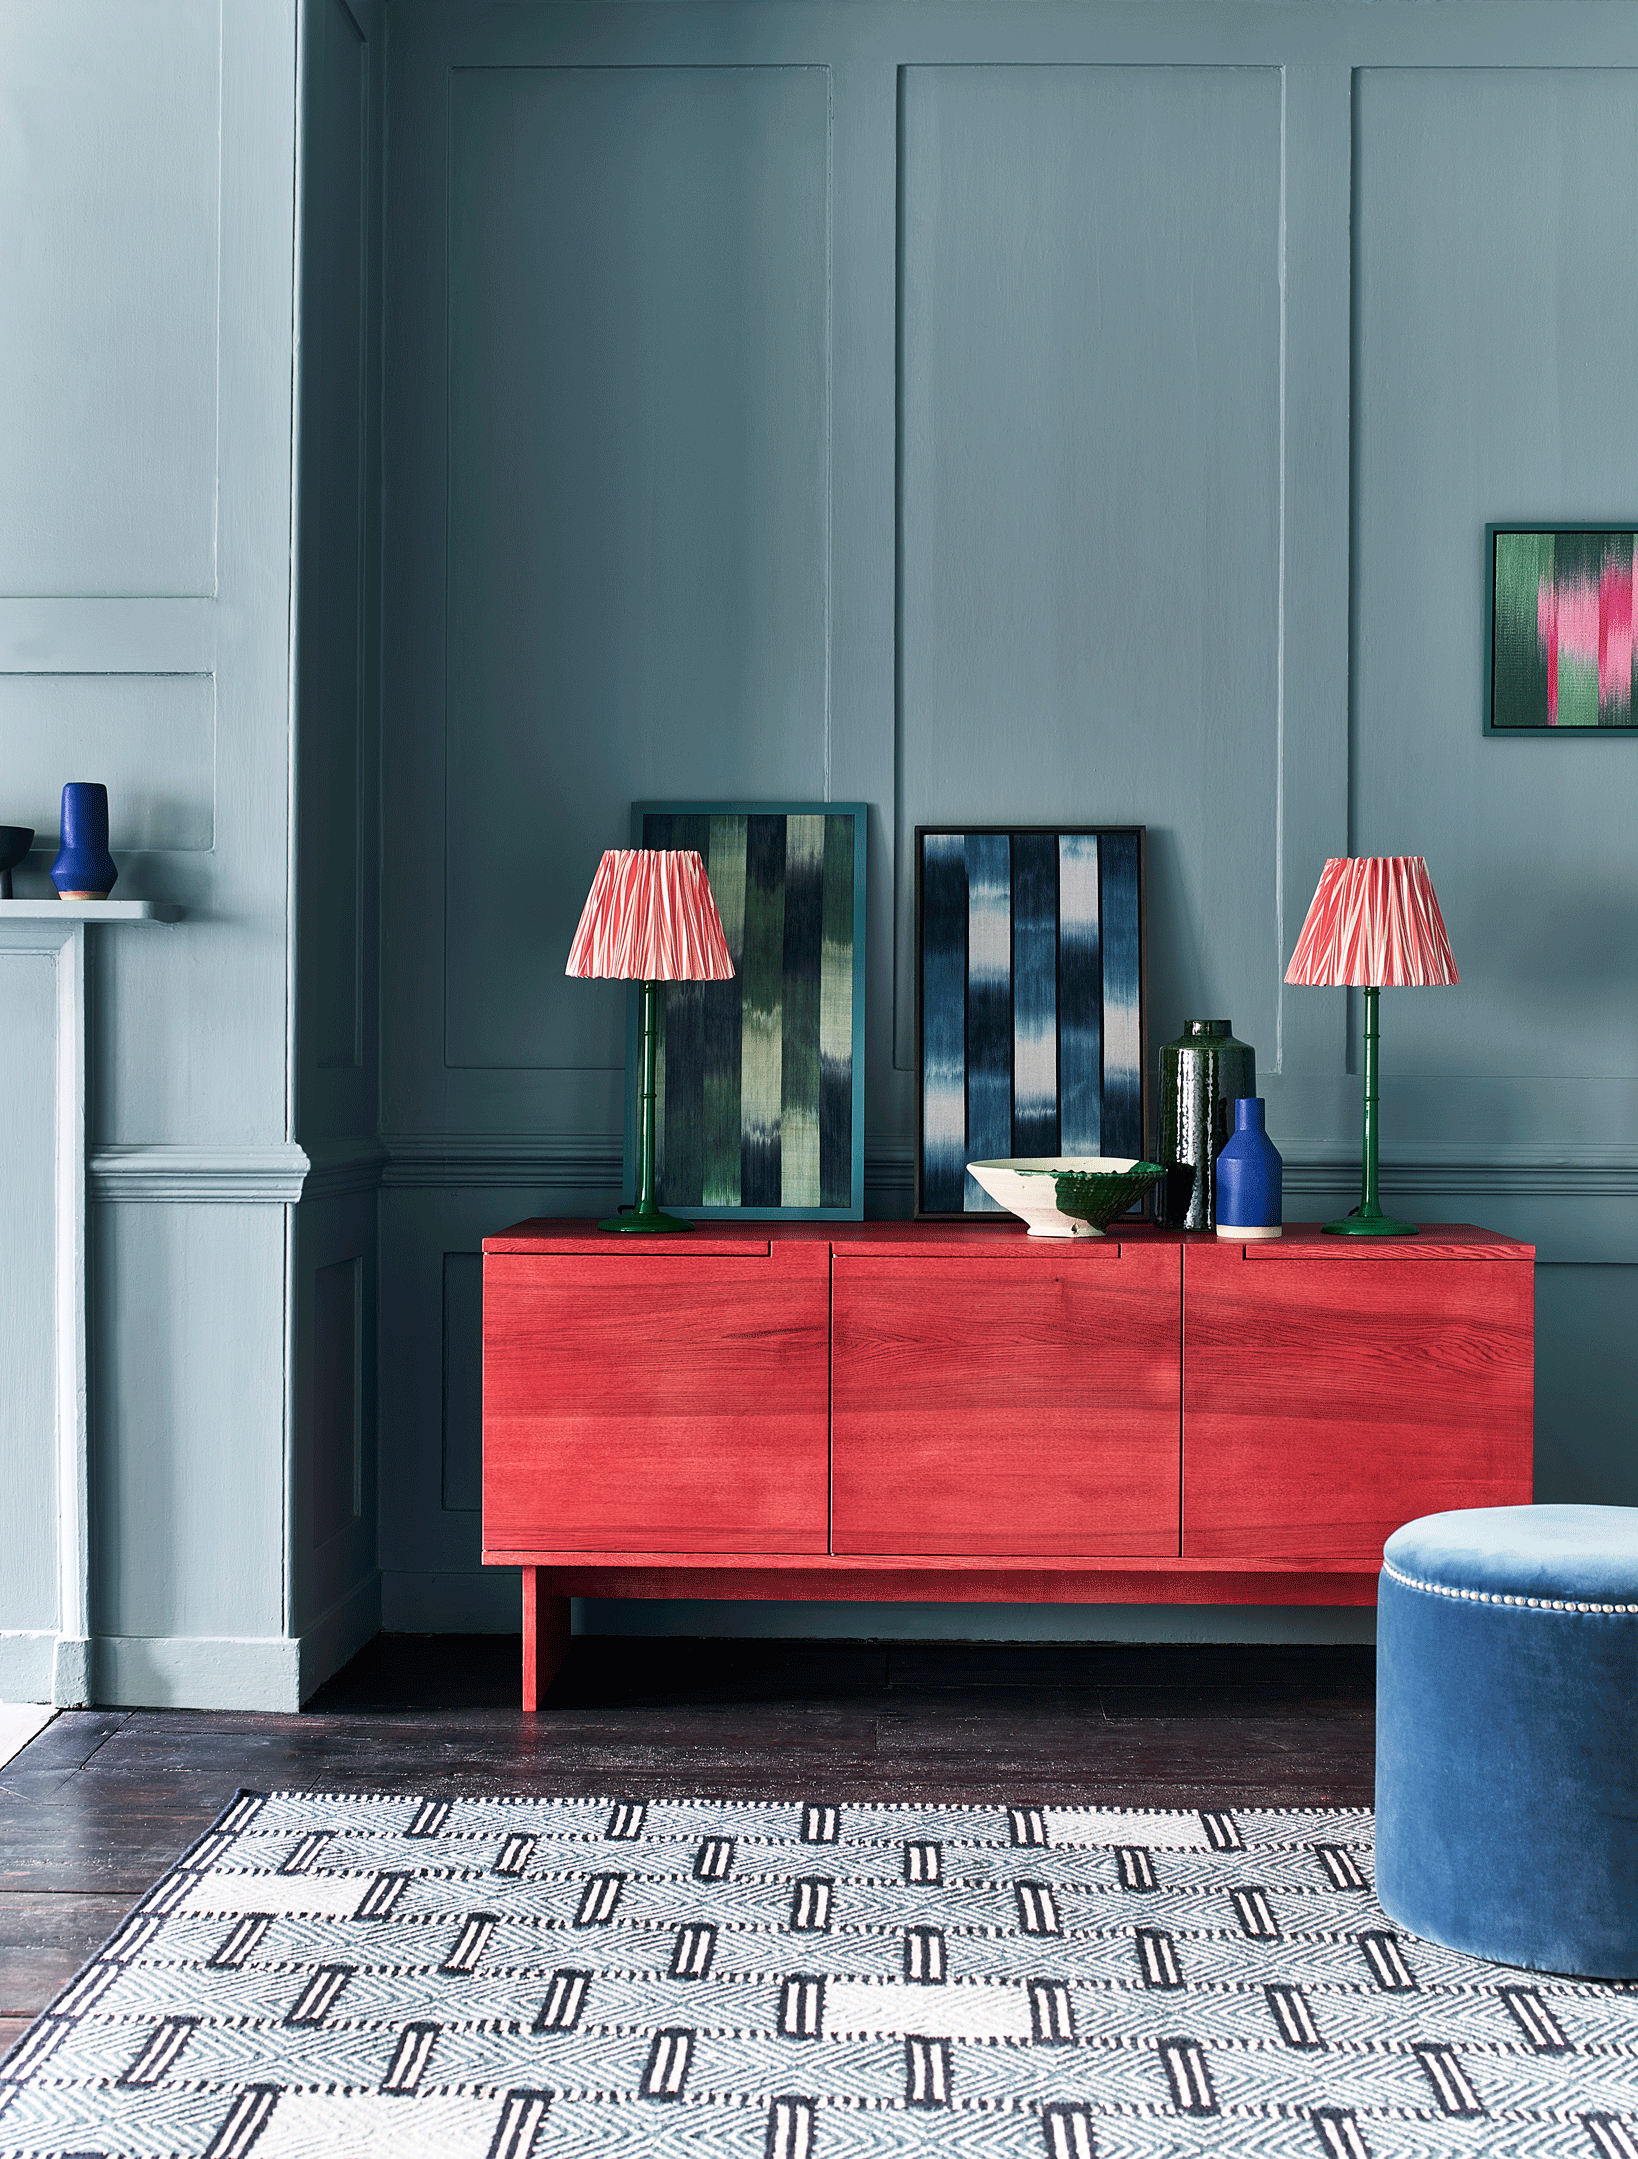 Decorating with primary colors